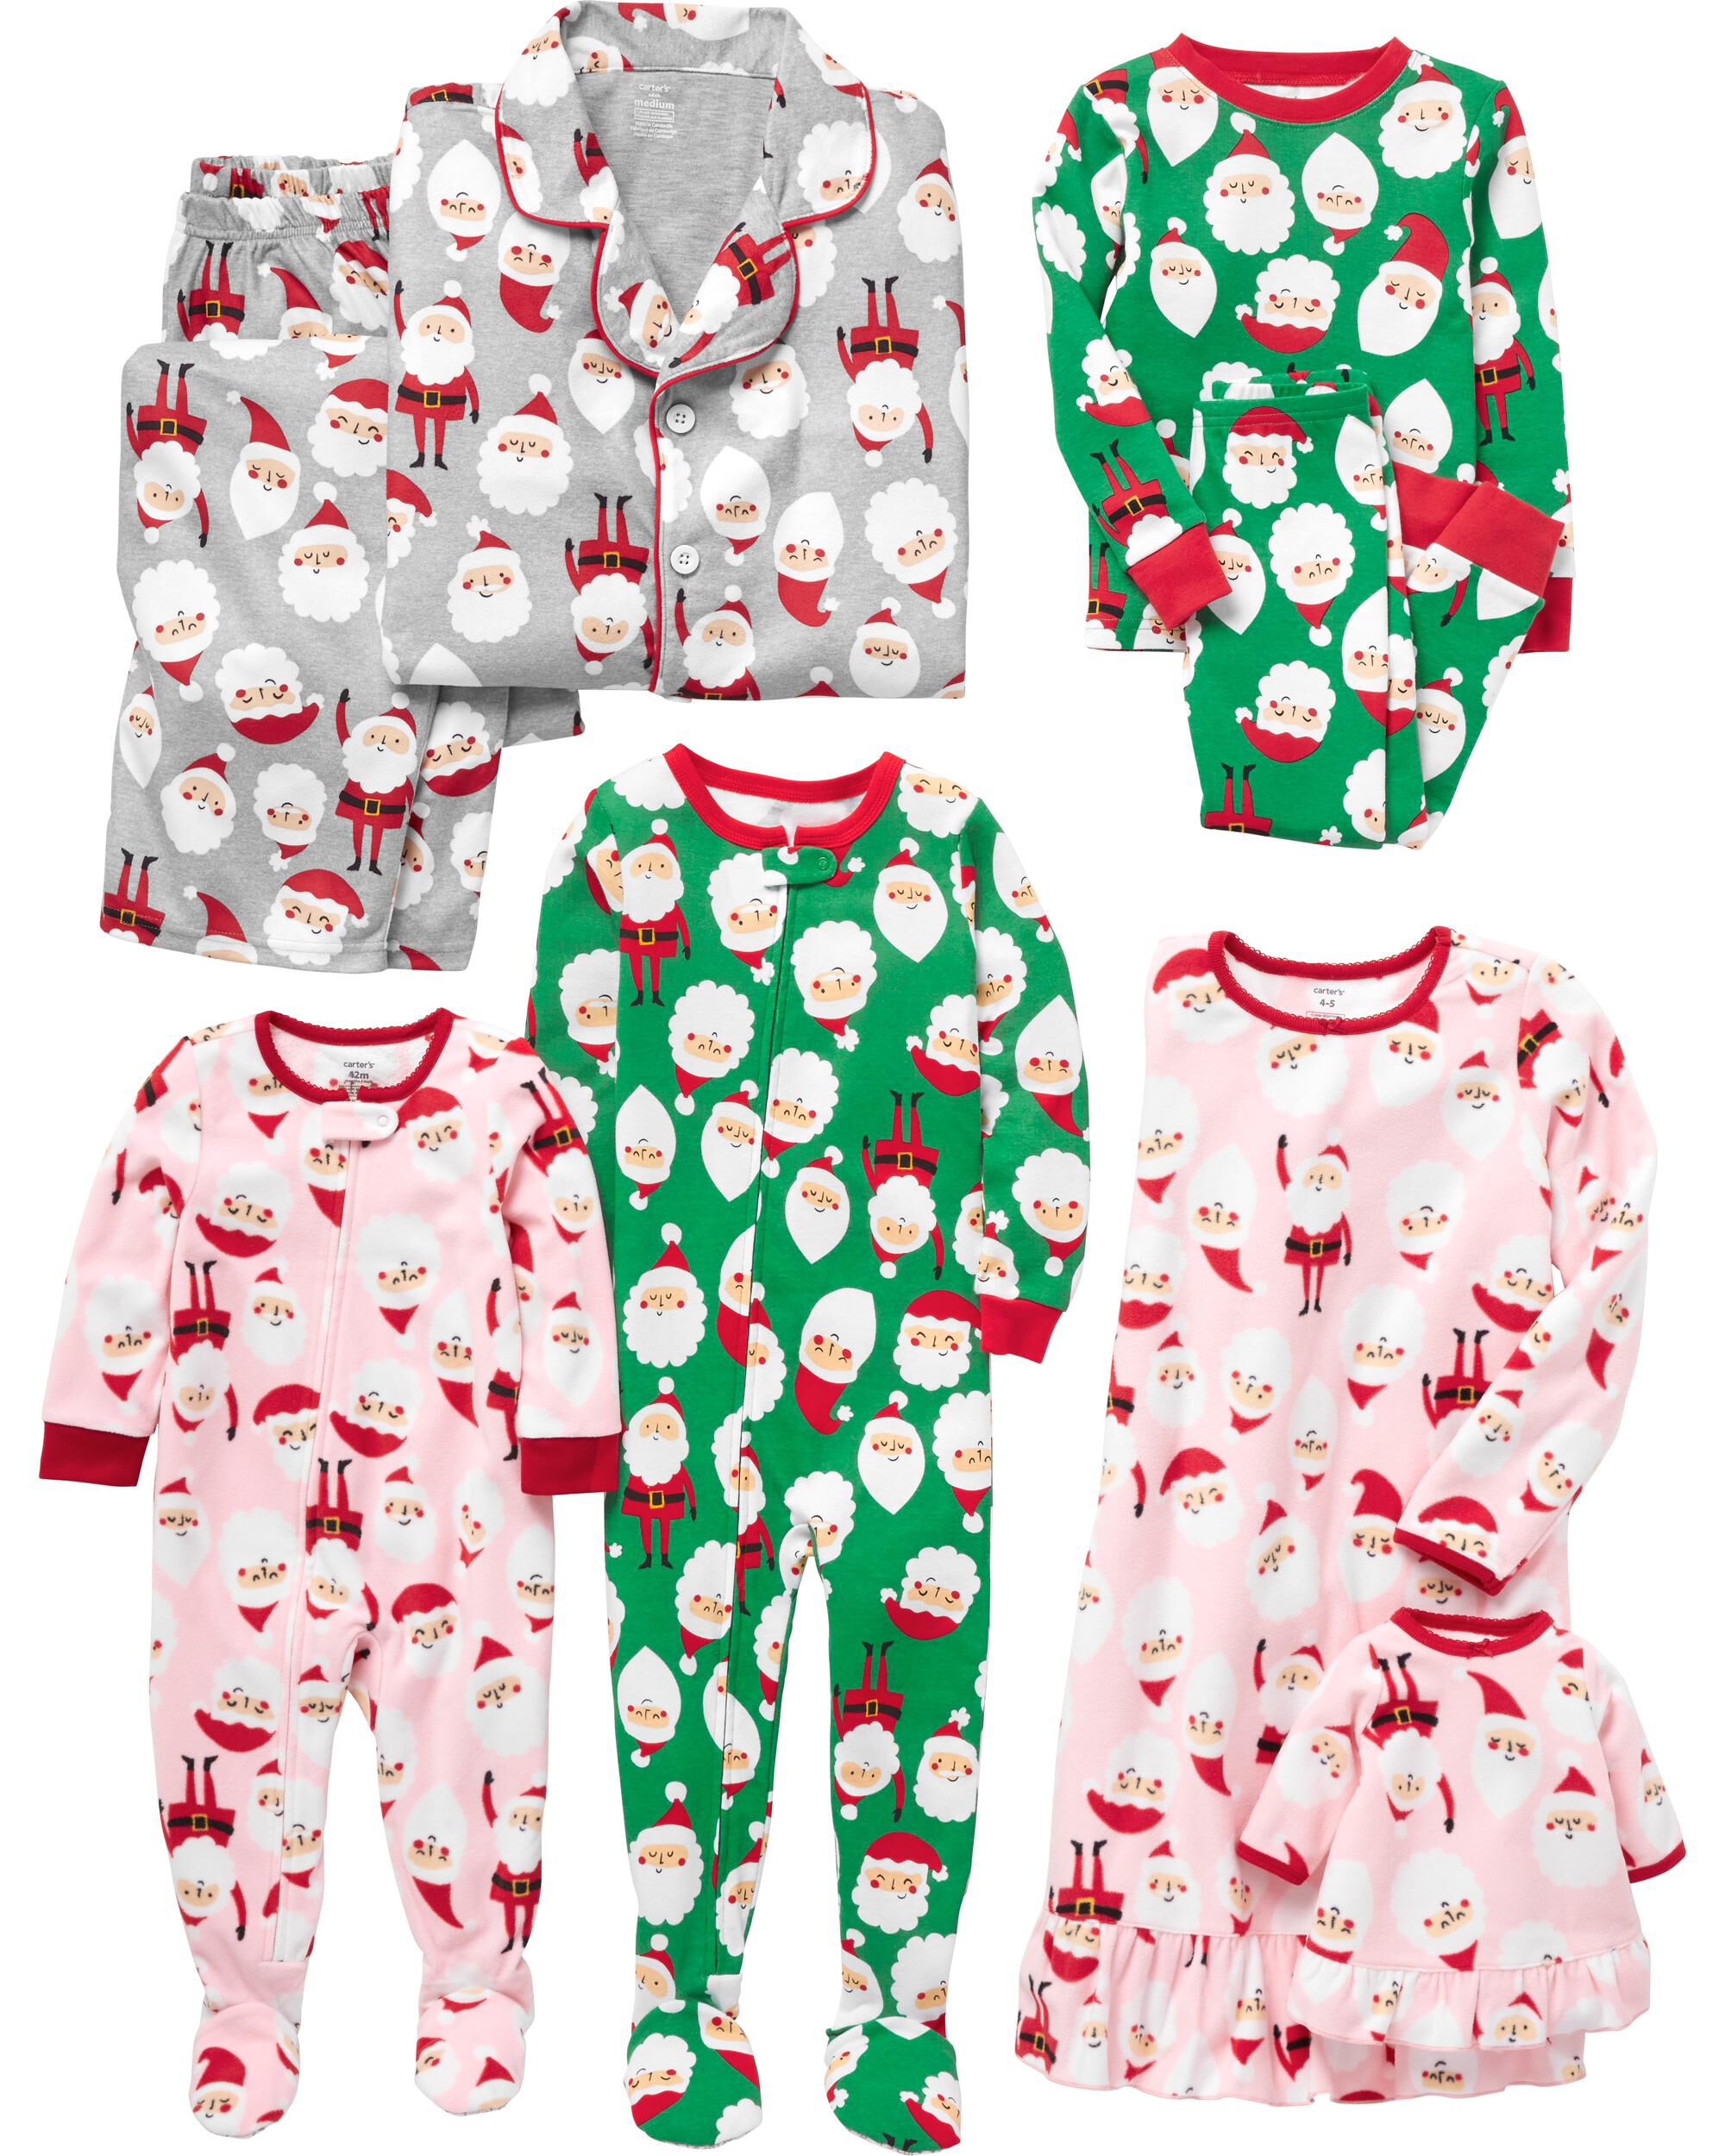 Carters Footed Pajamas Size Chart